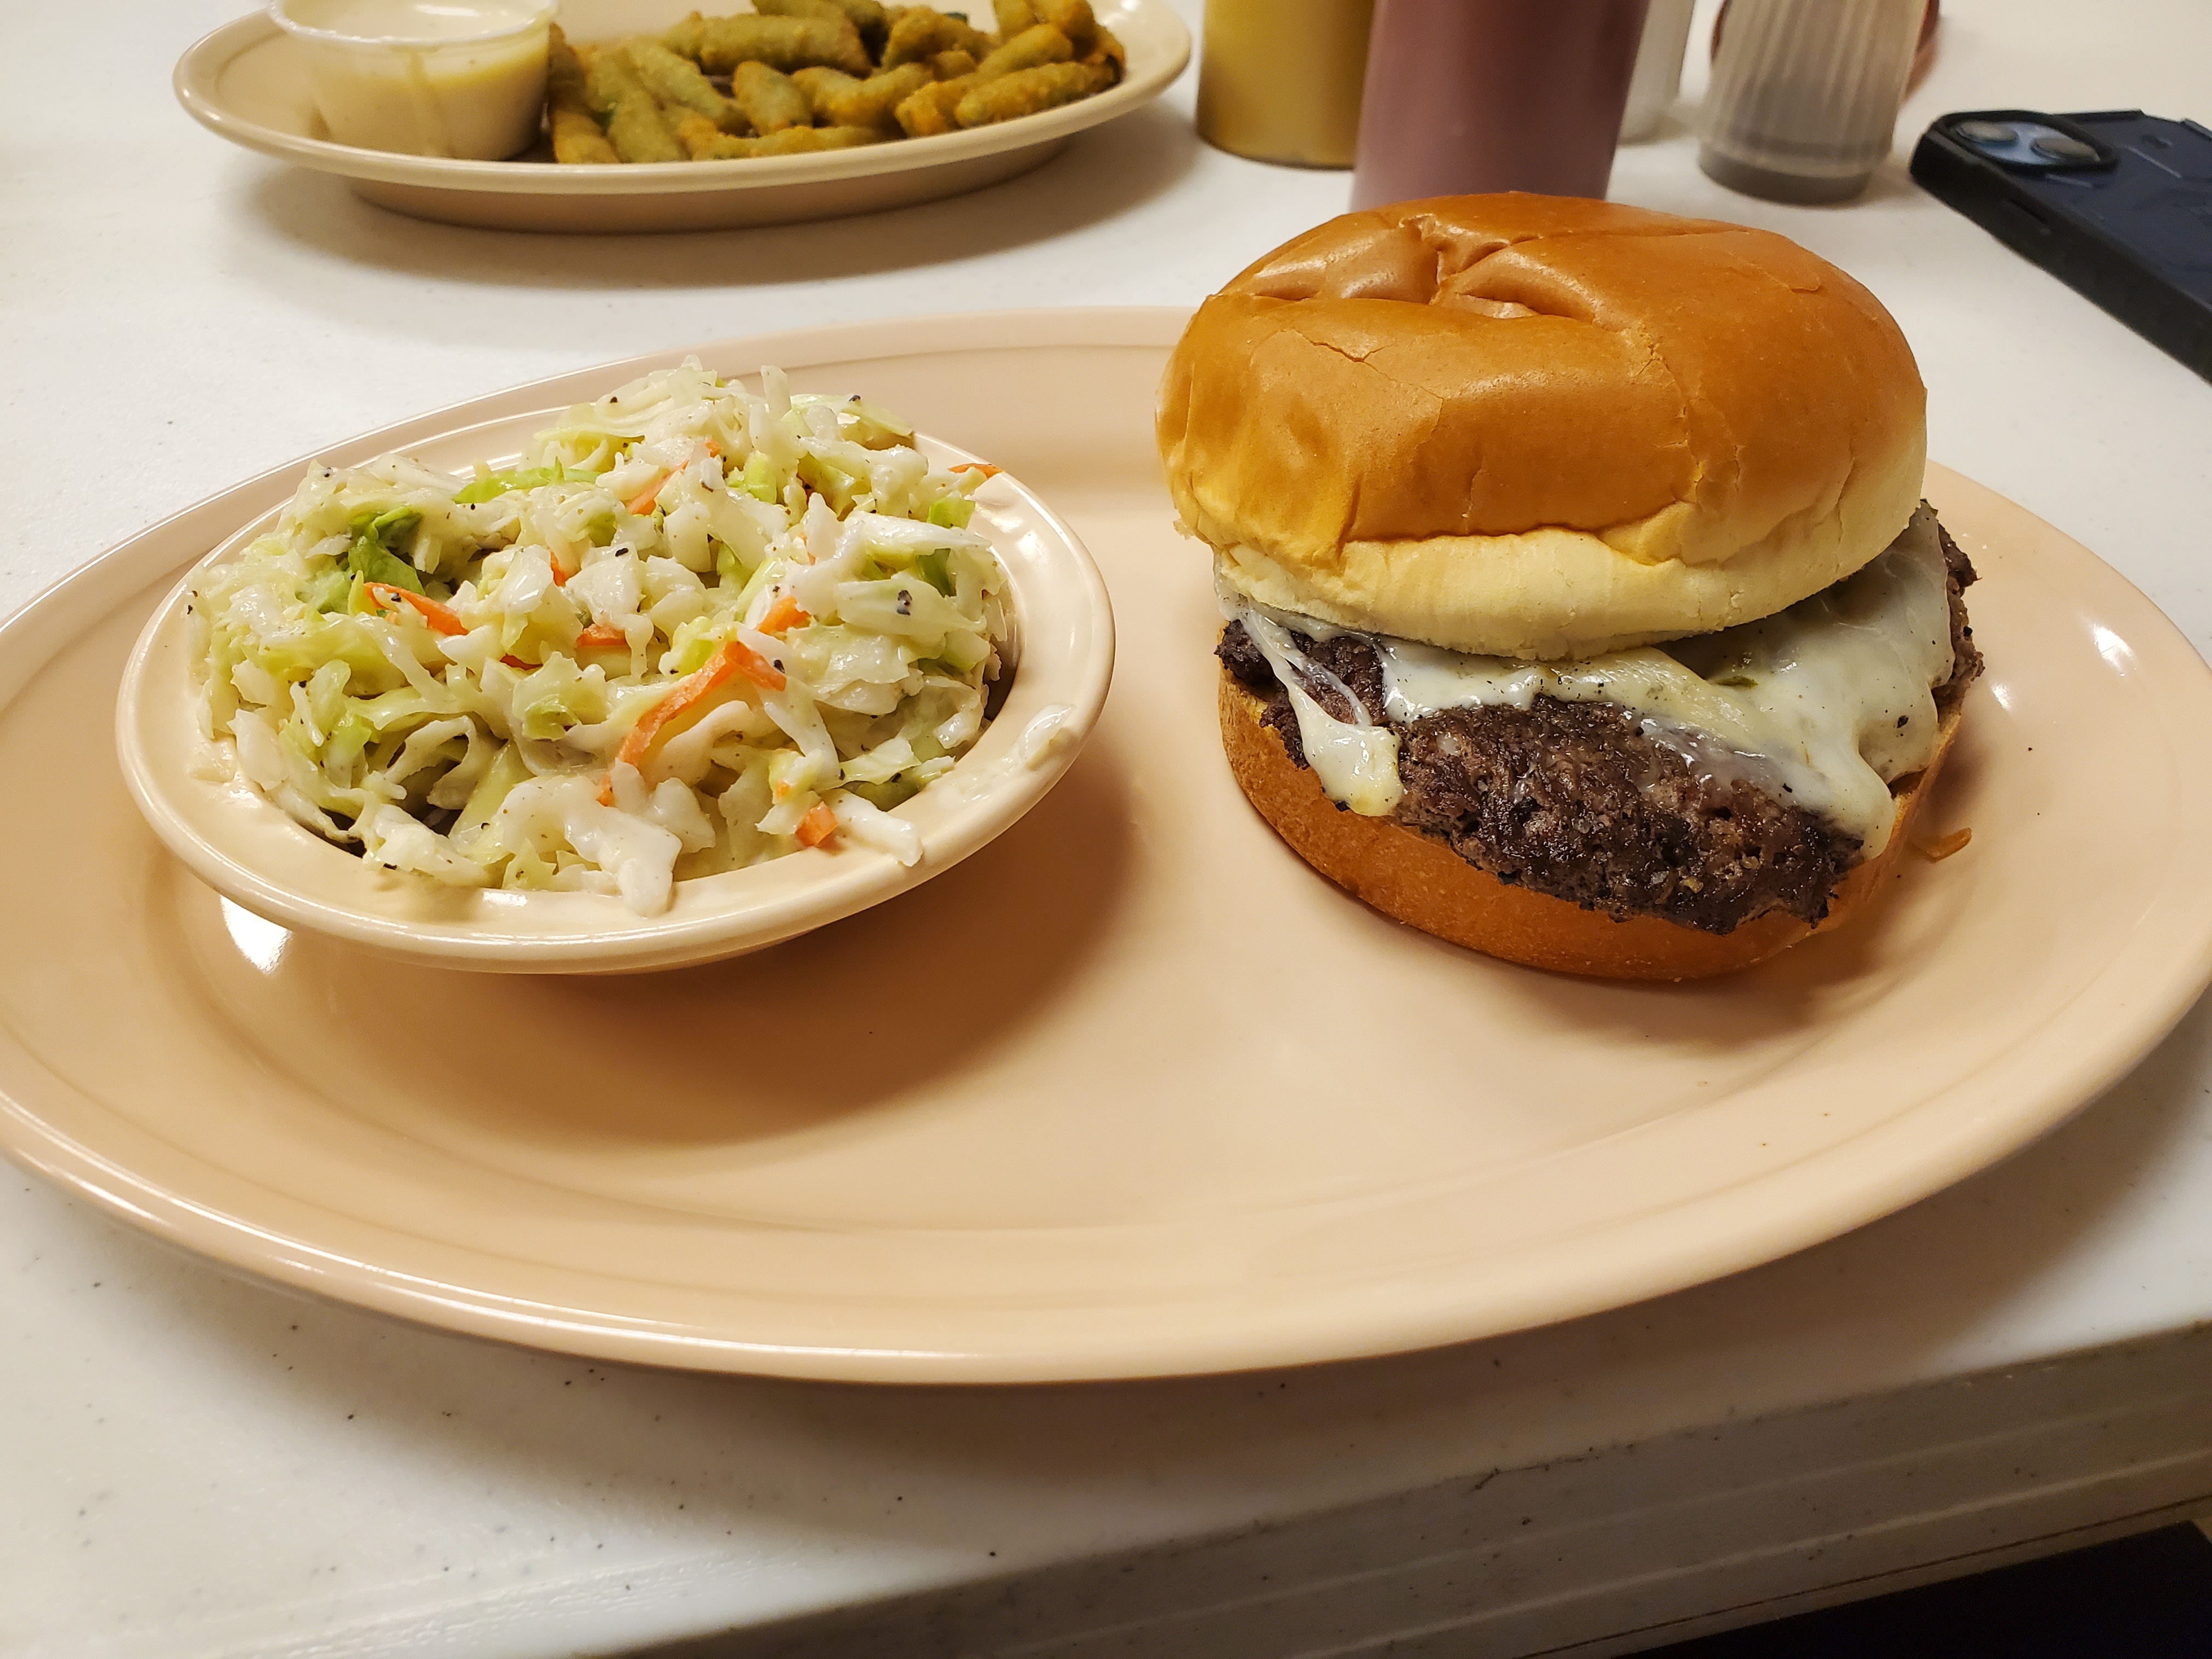 On an oval plate, there is a cheeseburger and a bowl of slaw. Photo by Carl Busch.